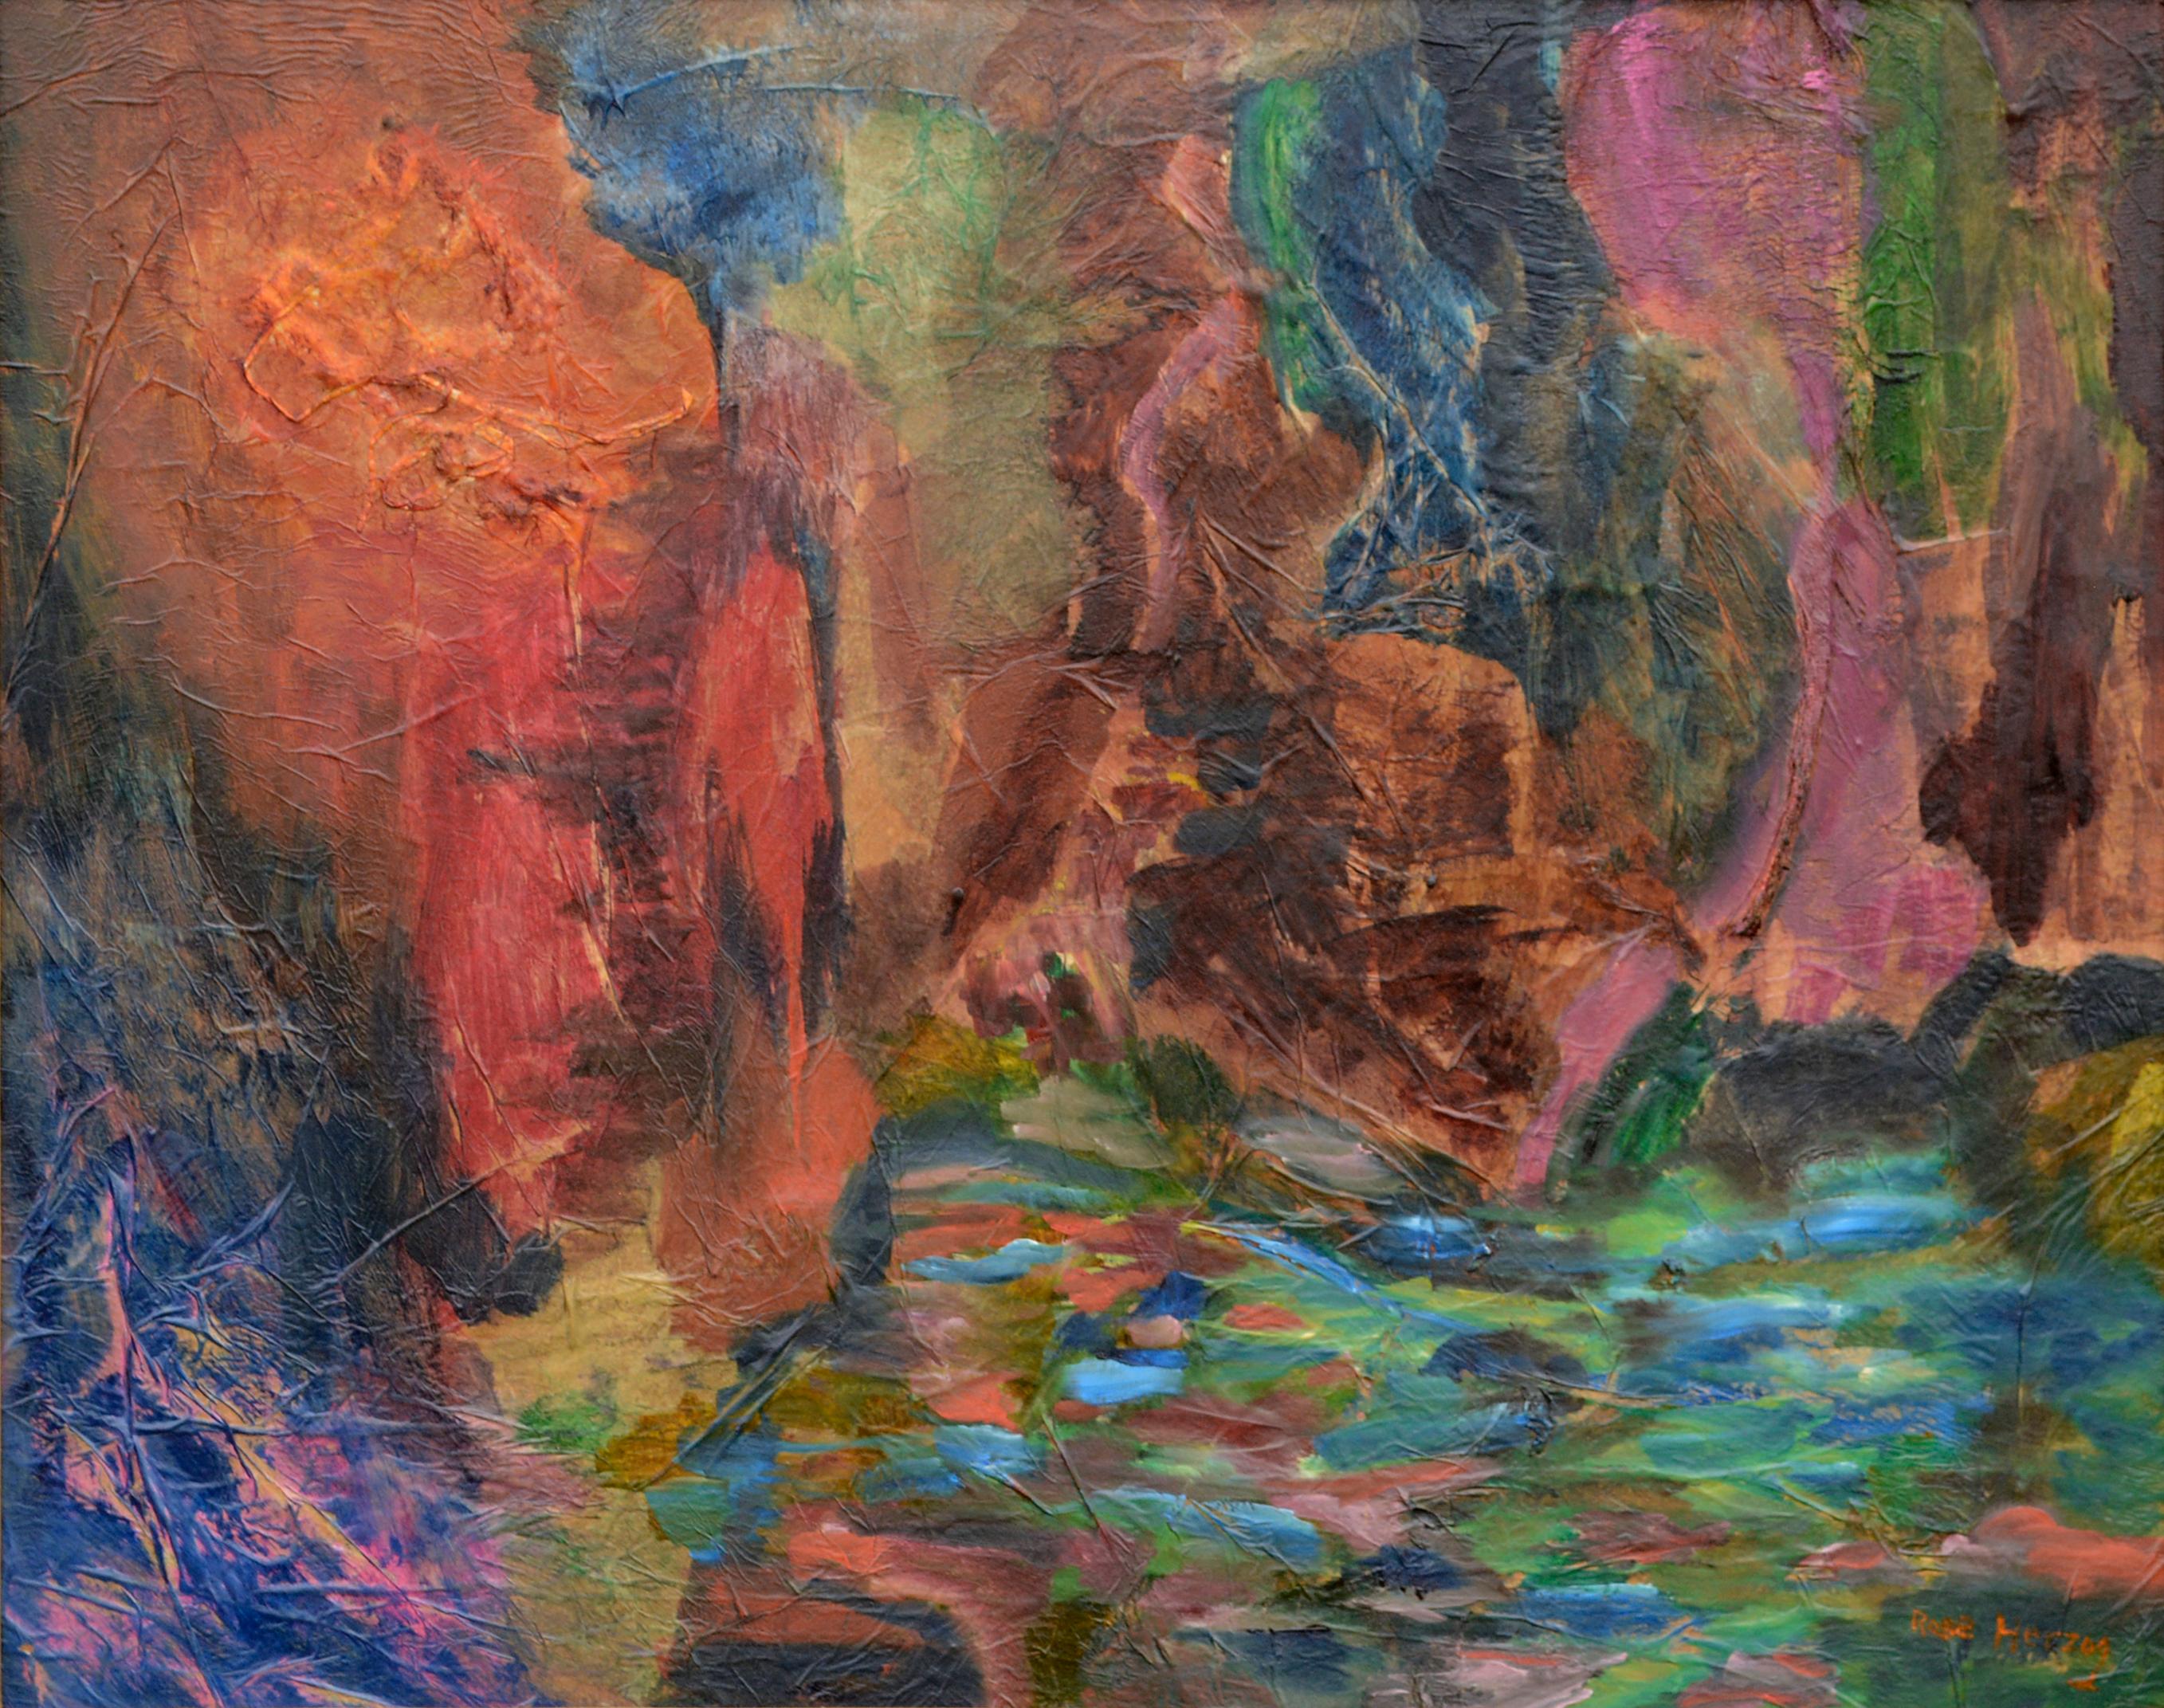 Shimmering Pond in the Woods Abstract 1960 - Painting by Rose Herzog